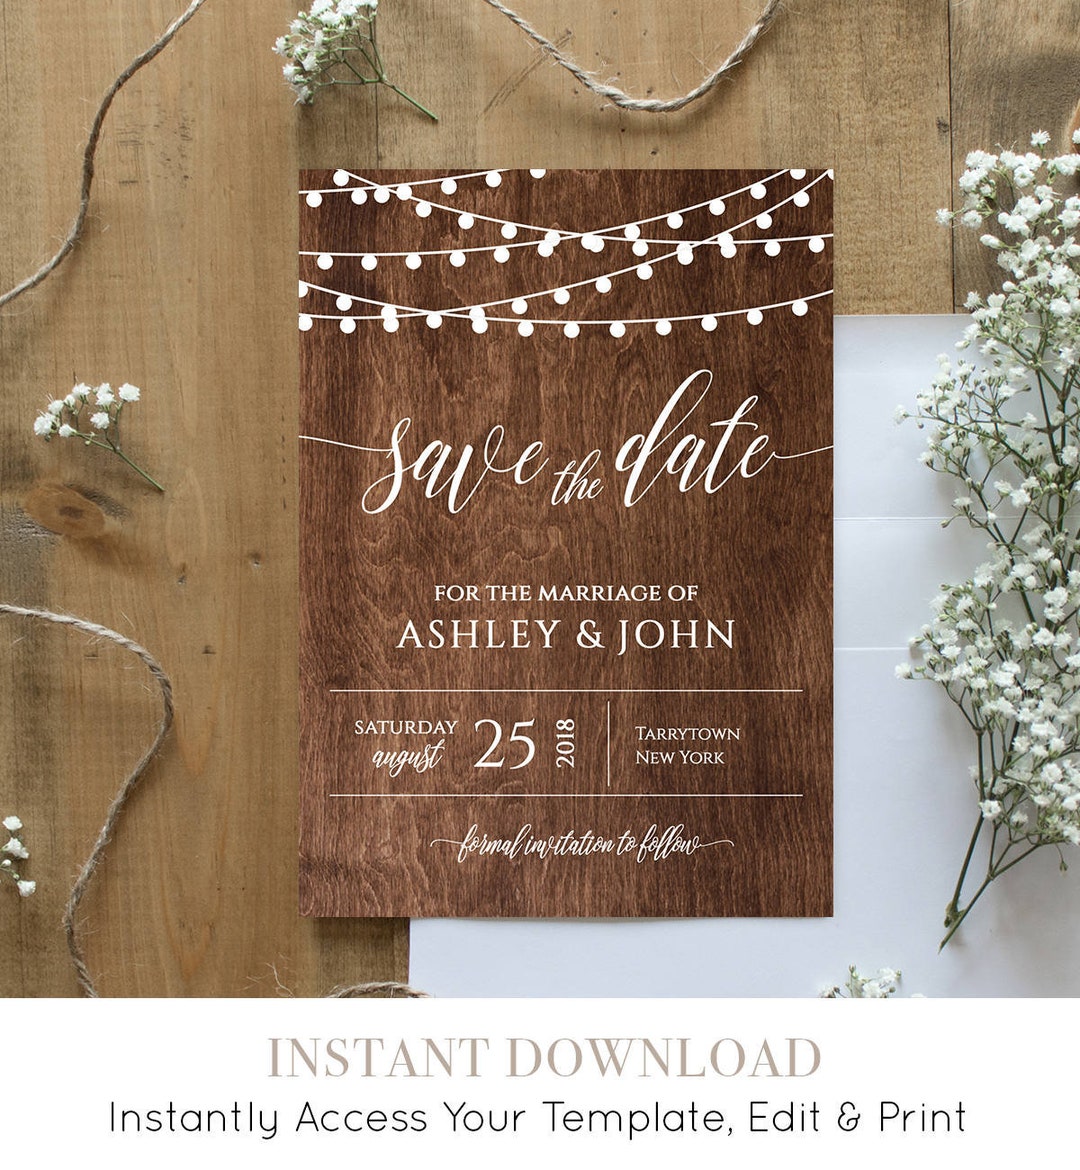 Sweet Love Save the Date Personalized Stickers, Zazzle